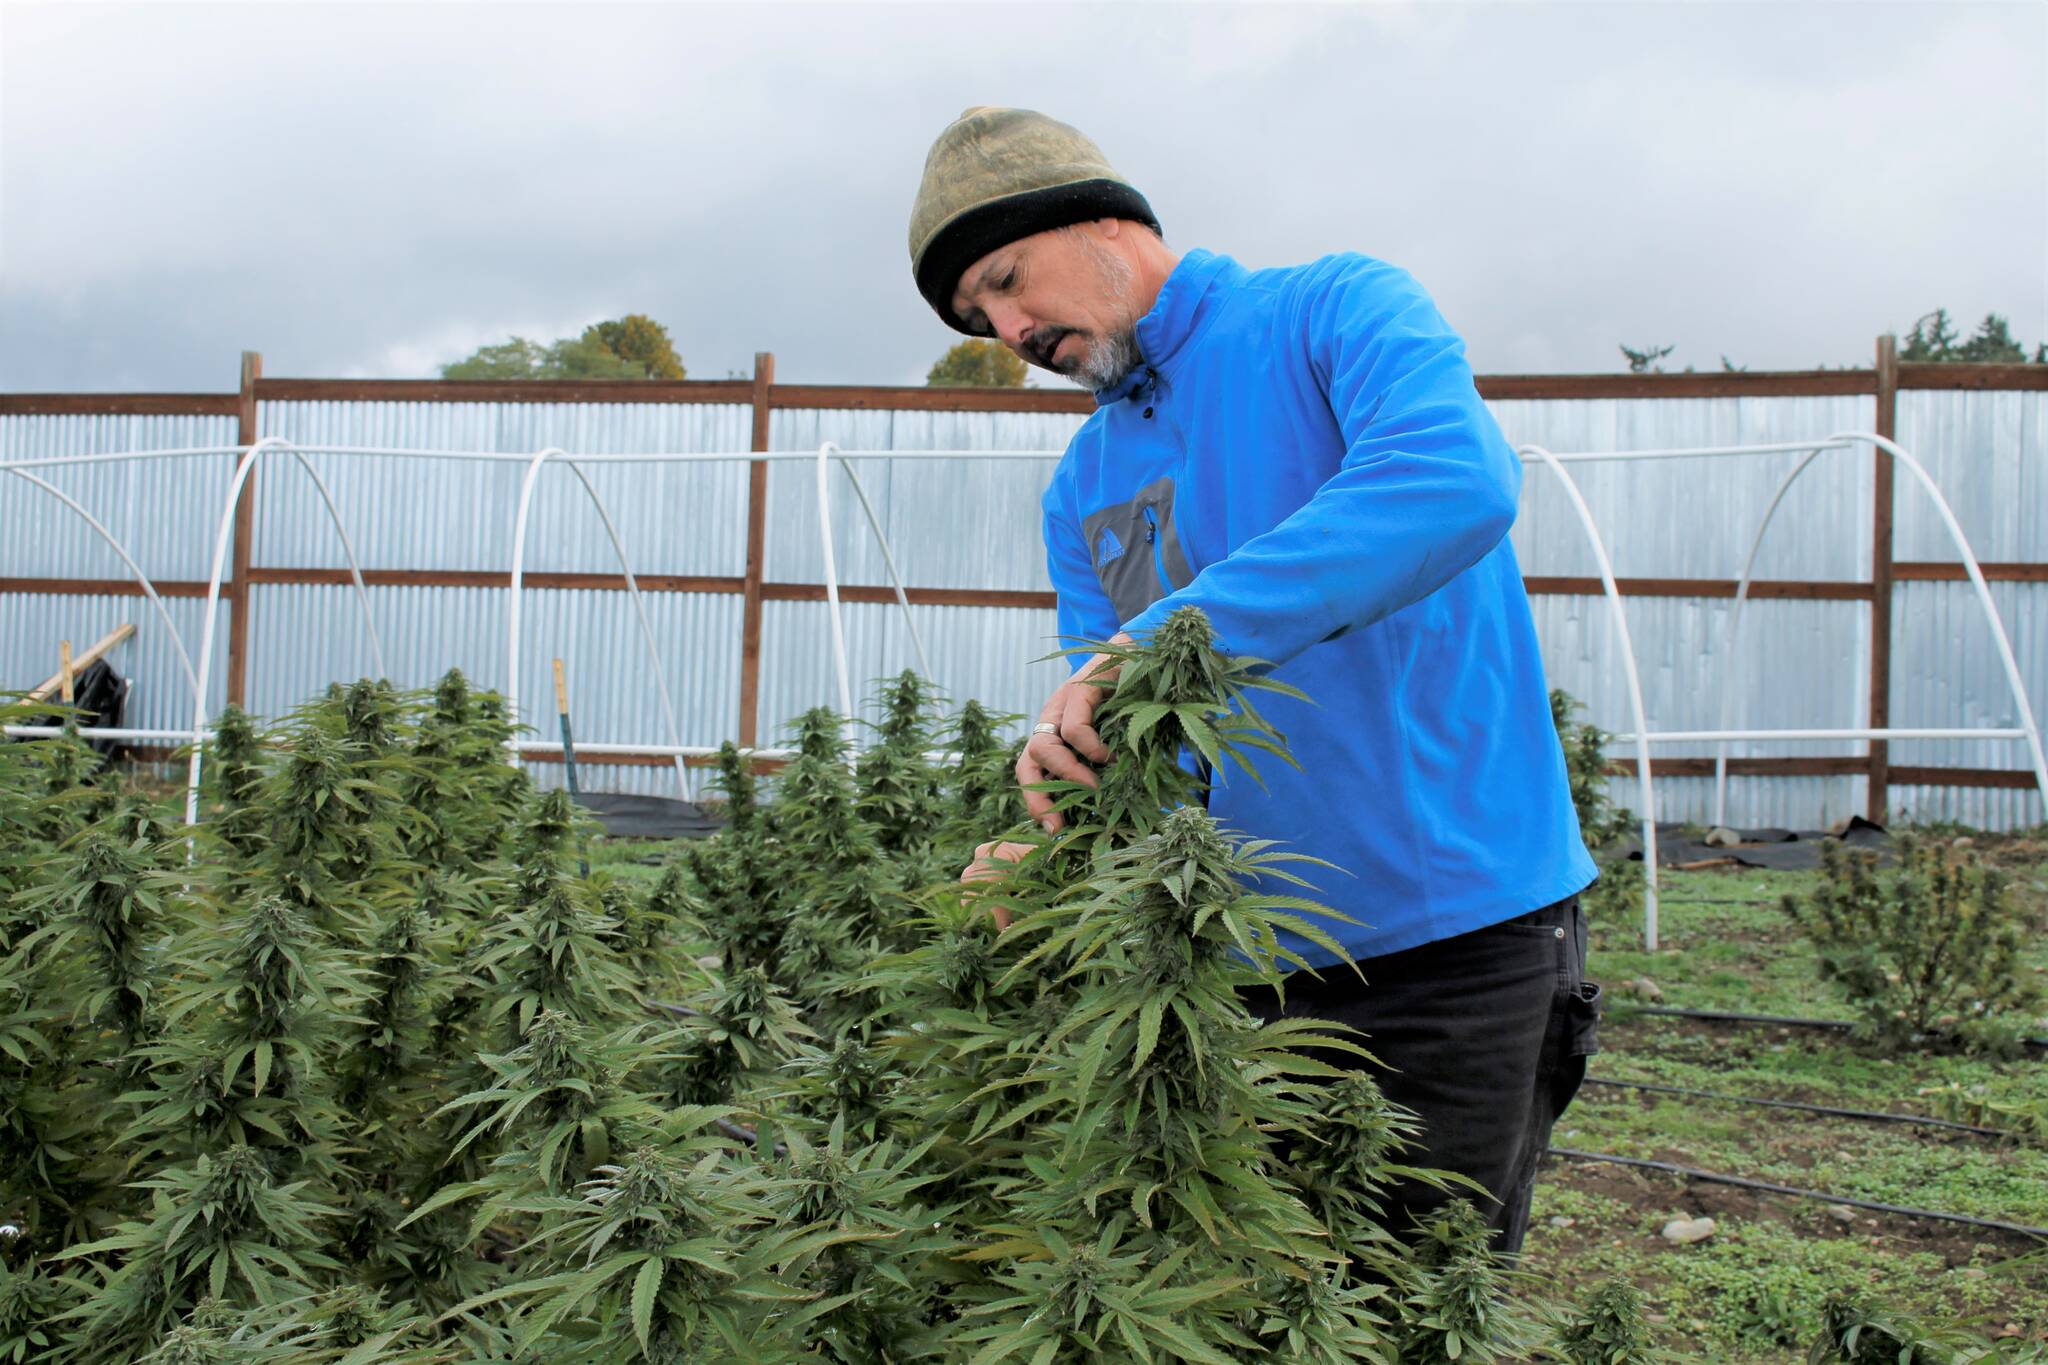 Photo by Kira Erickson
Adam Lind pulls a handful of leaves from a cannabis plant on his marijuana farm. Harvesting of the crop takes place in October.